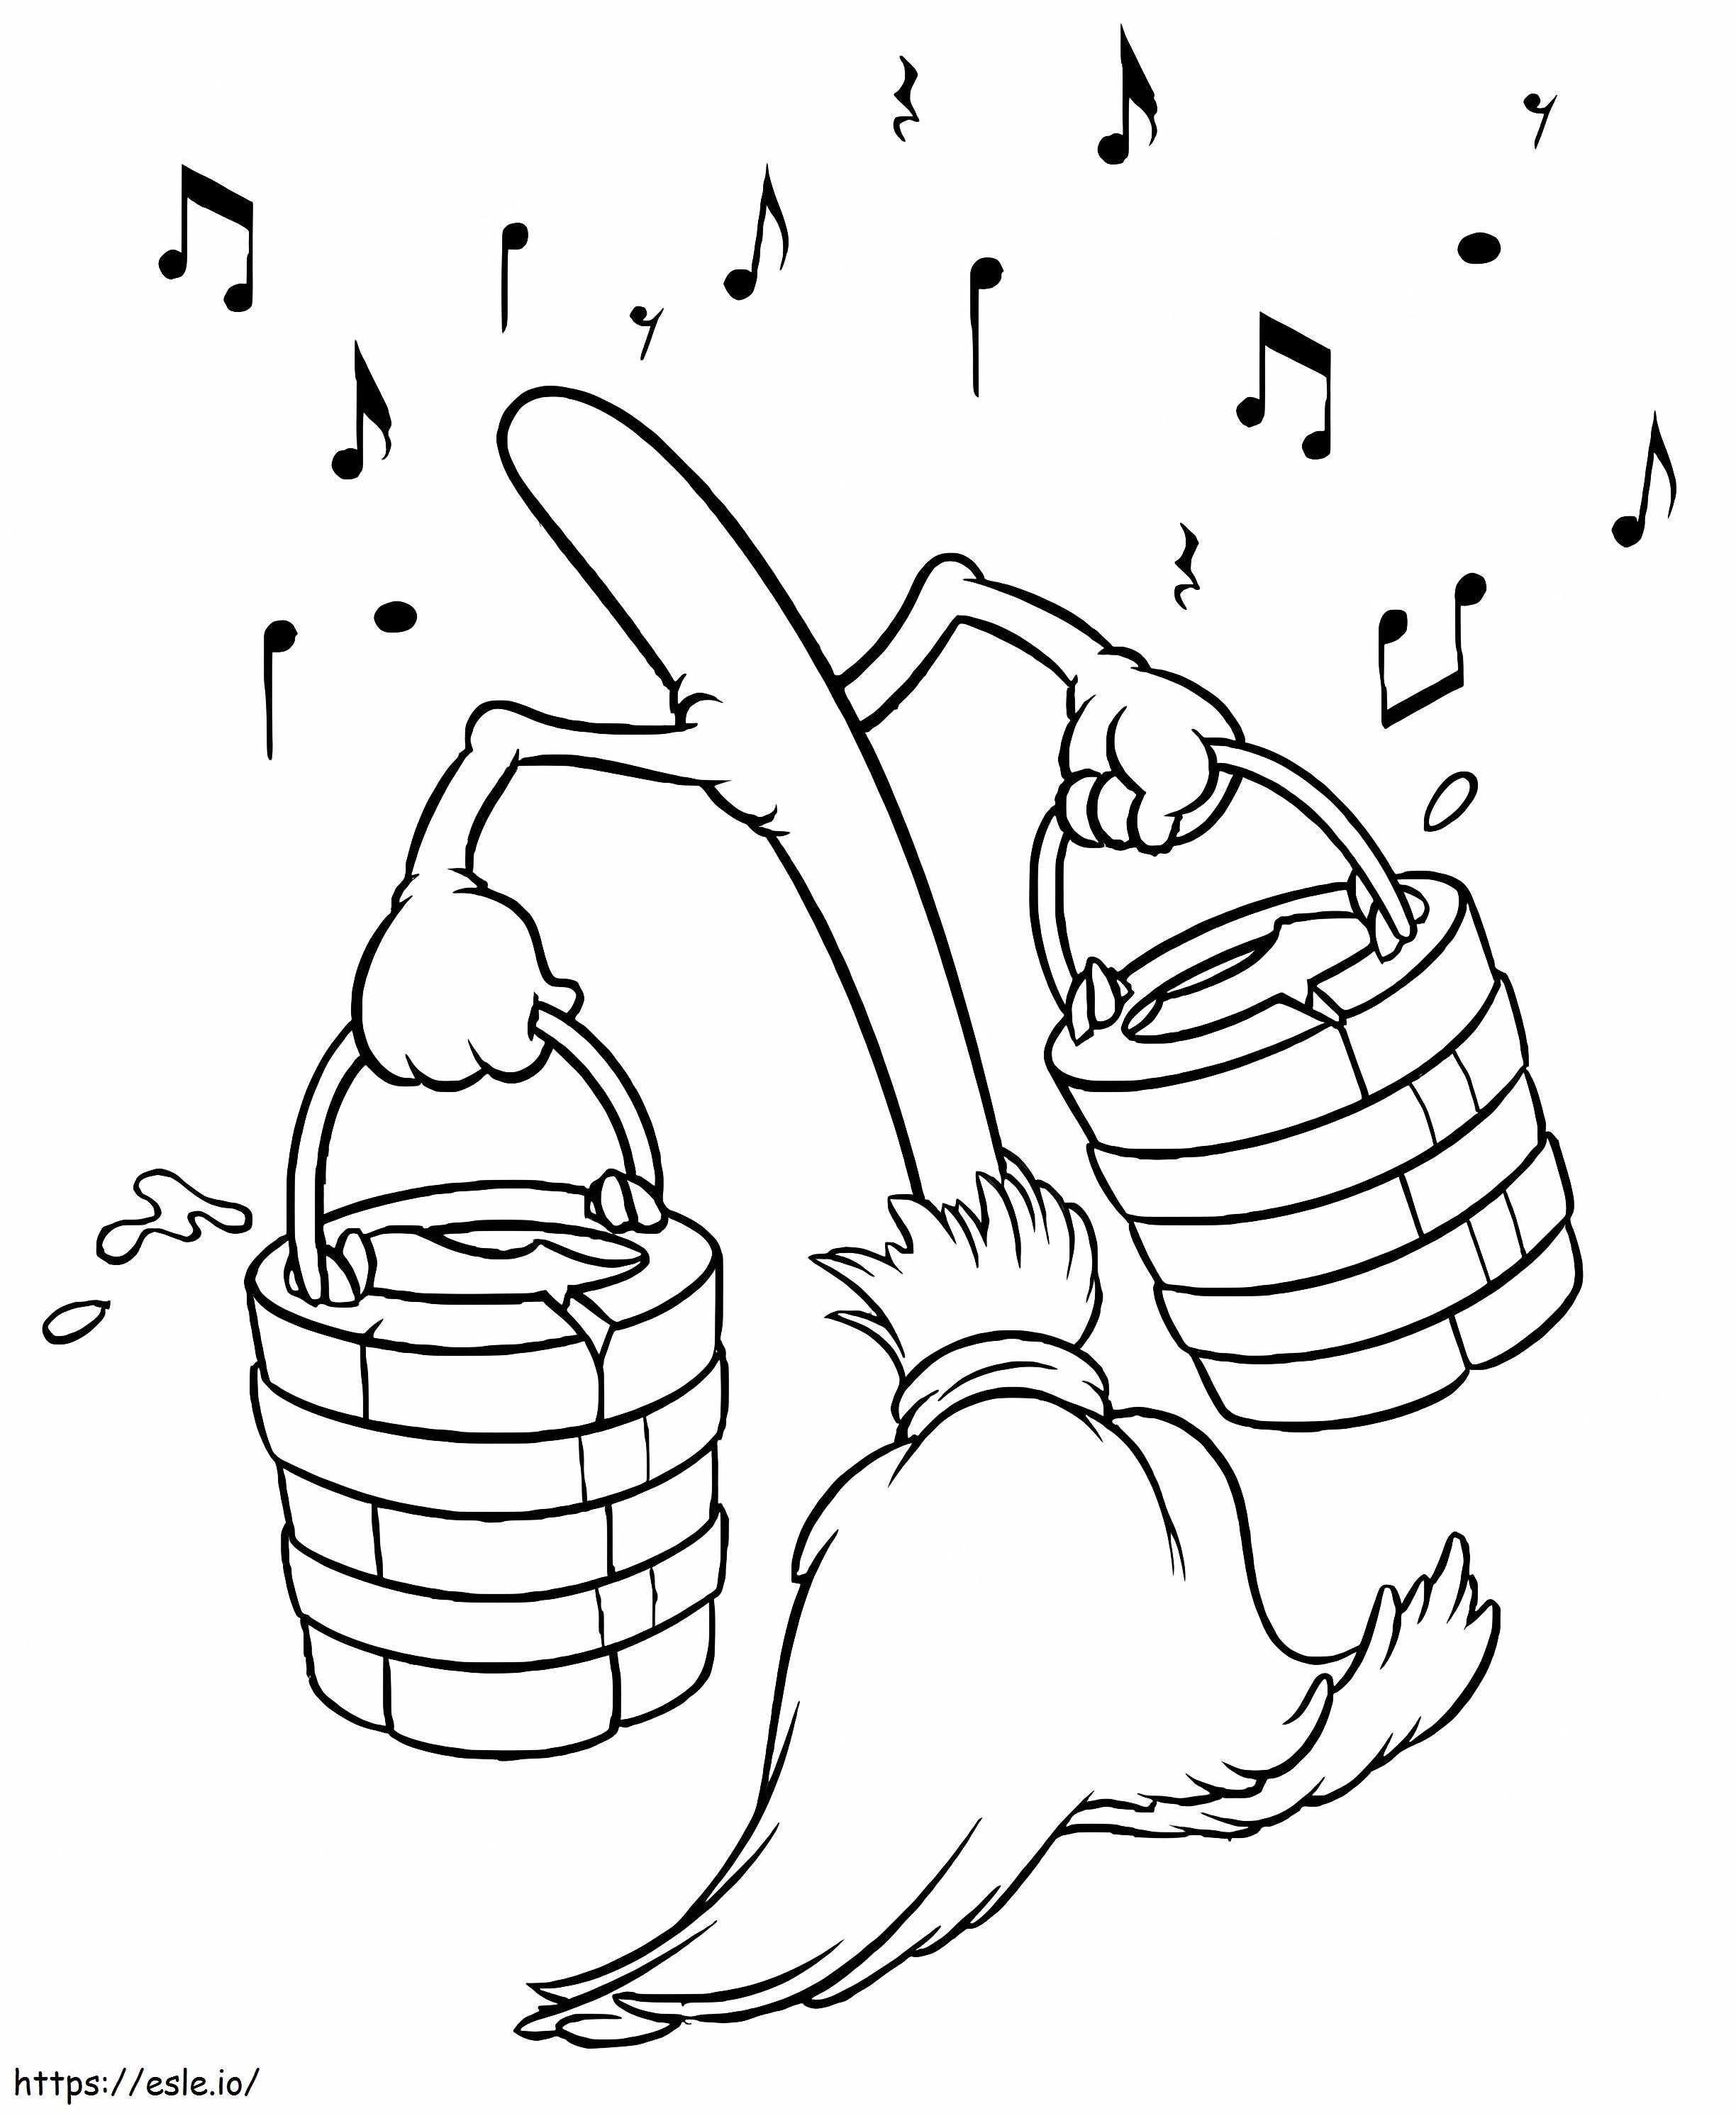 Magic Broom From Fantasia coloring page